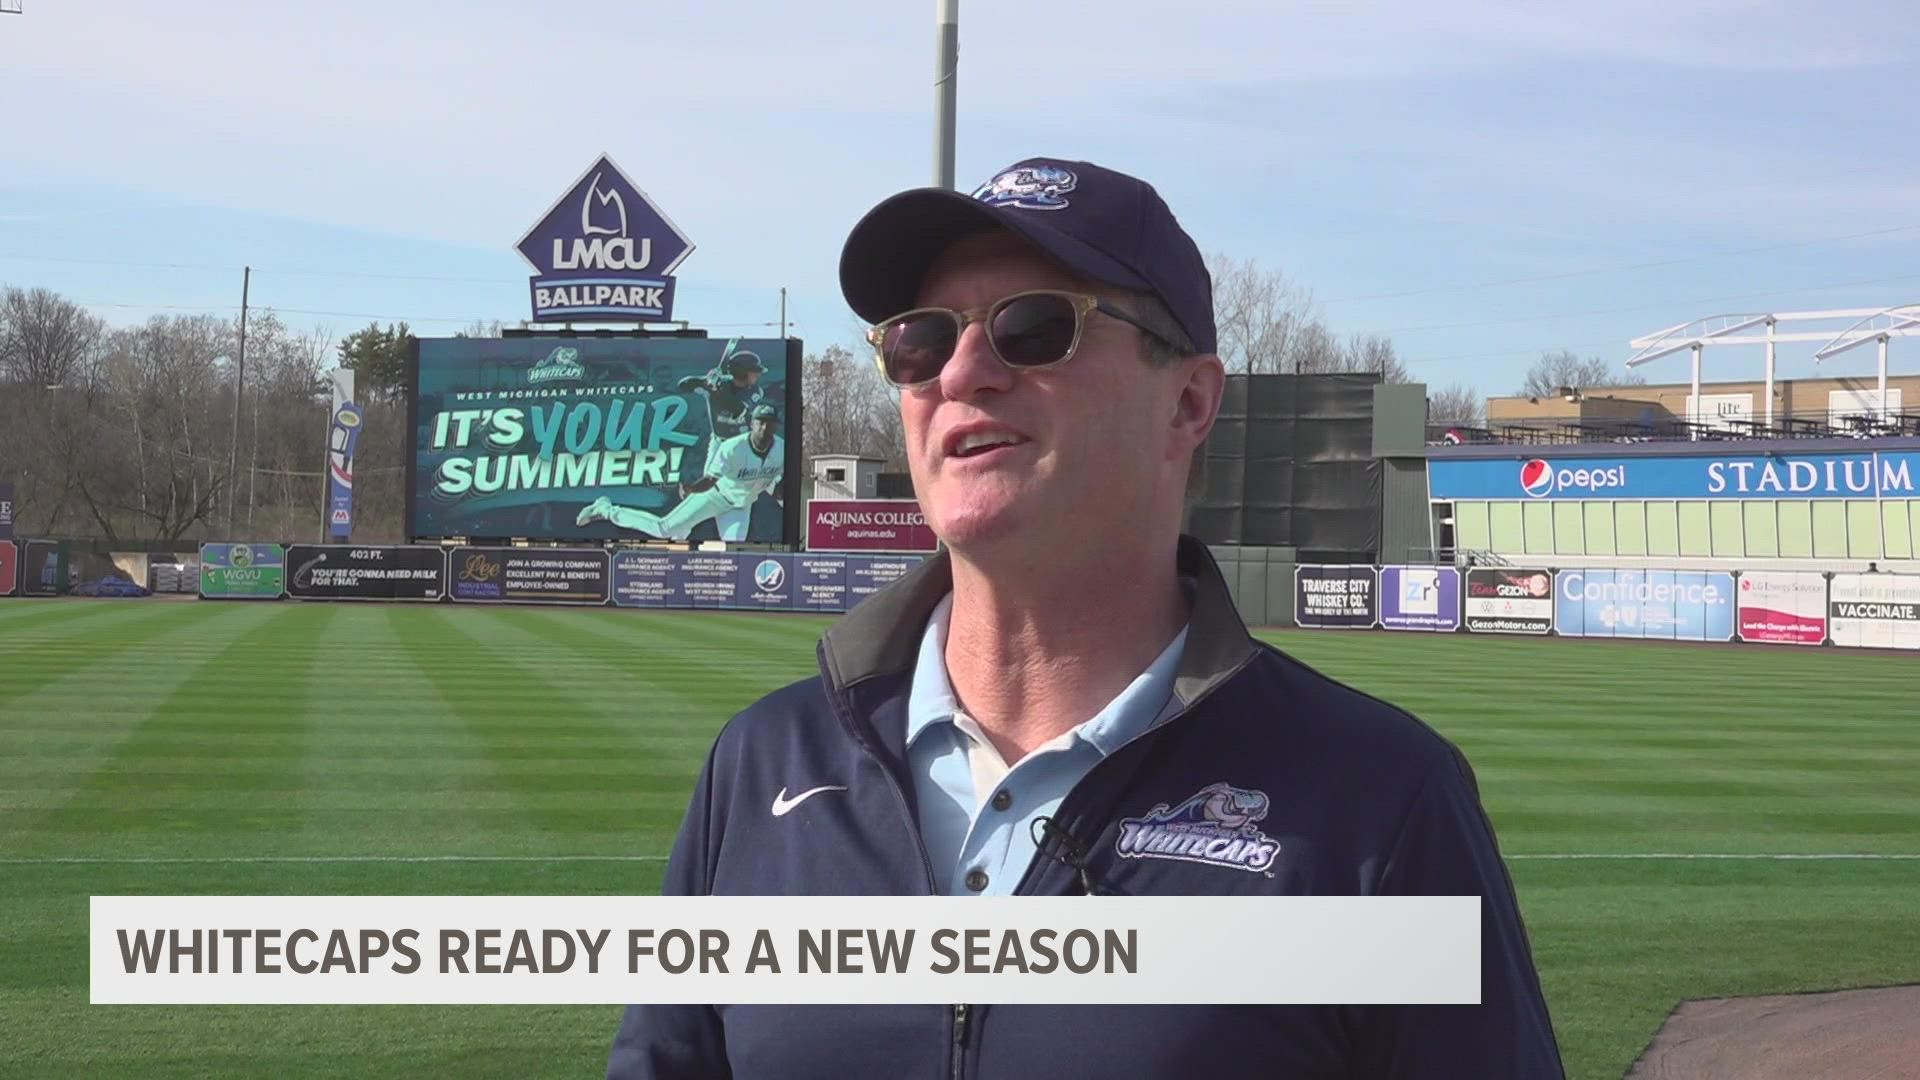 The 2022 season is going to look and feel a lot different at LMCU Ballpark. Whitecaps kick off opening day Tuesday at 6:35 p.m.